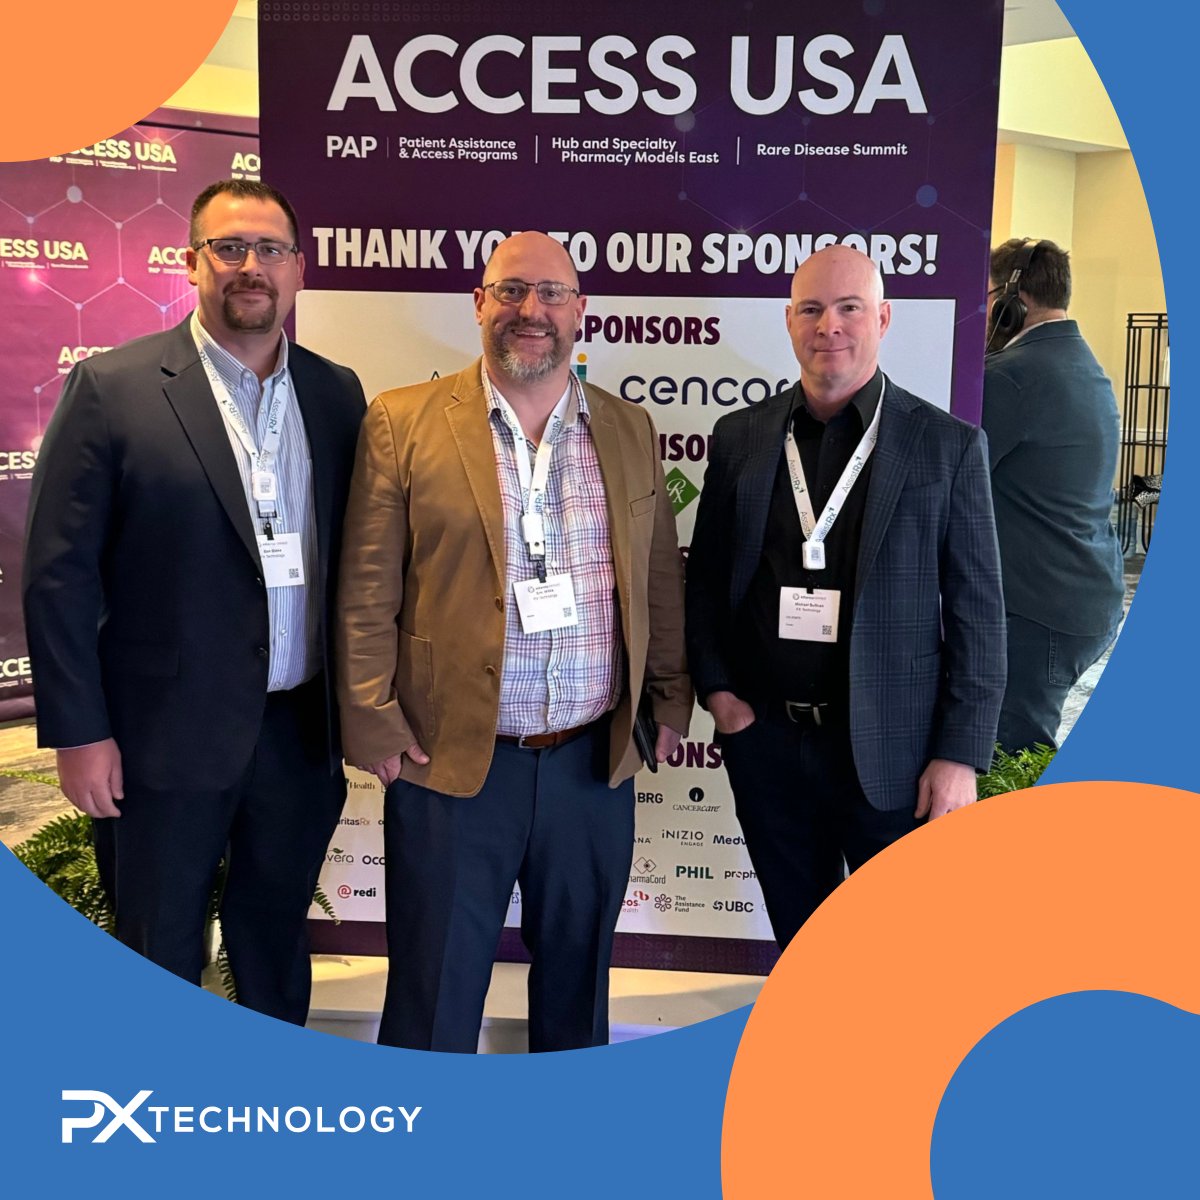 Our Strategic Partnership team is currently at the Access USA Patient Assistance & Access Programs conference in Philadelphia! They are thrilled to meet with potential partners and discuss how PXT can help boost awareness, efficiency, and accuracy for their programs.